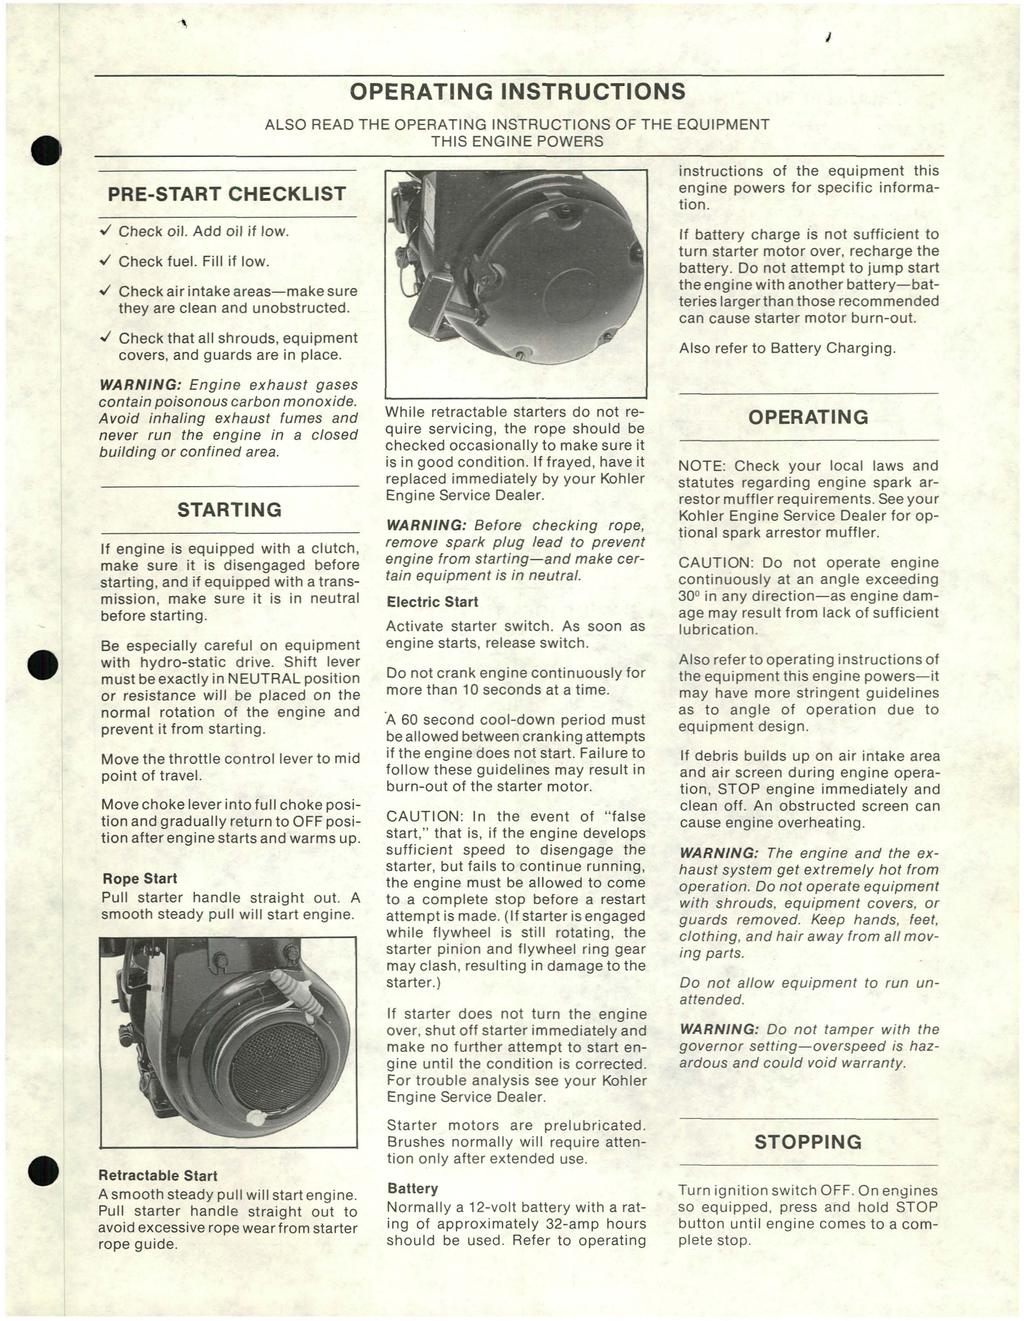 I OPERATING INSTRUCTIONS ALSO READ THE OPERATING INSTRUCTIONS OF THE EQUIPMENT THIS ENGINE POWERS instructions of the equipment this engine powers for specific information.